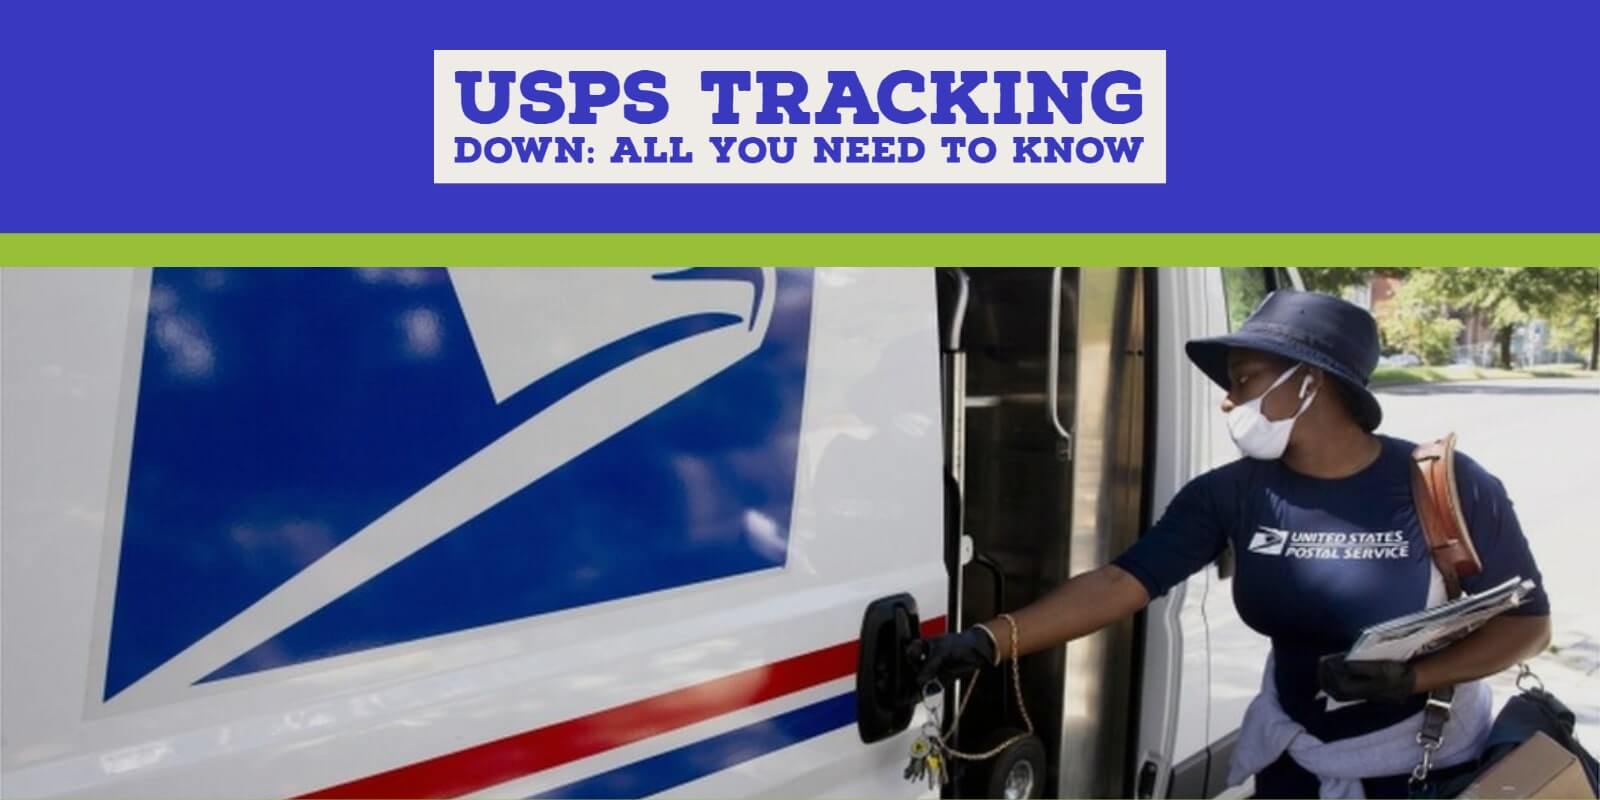 USPS Tracking Down Explanation